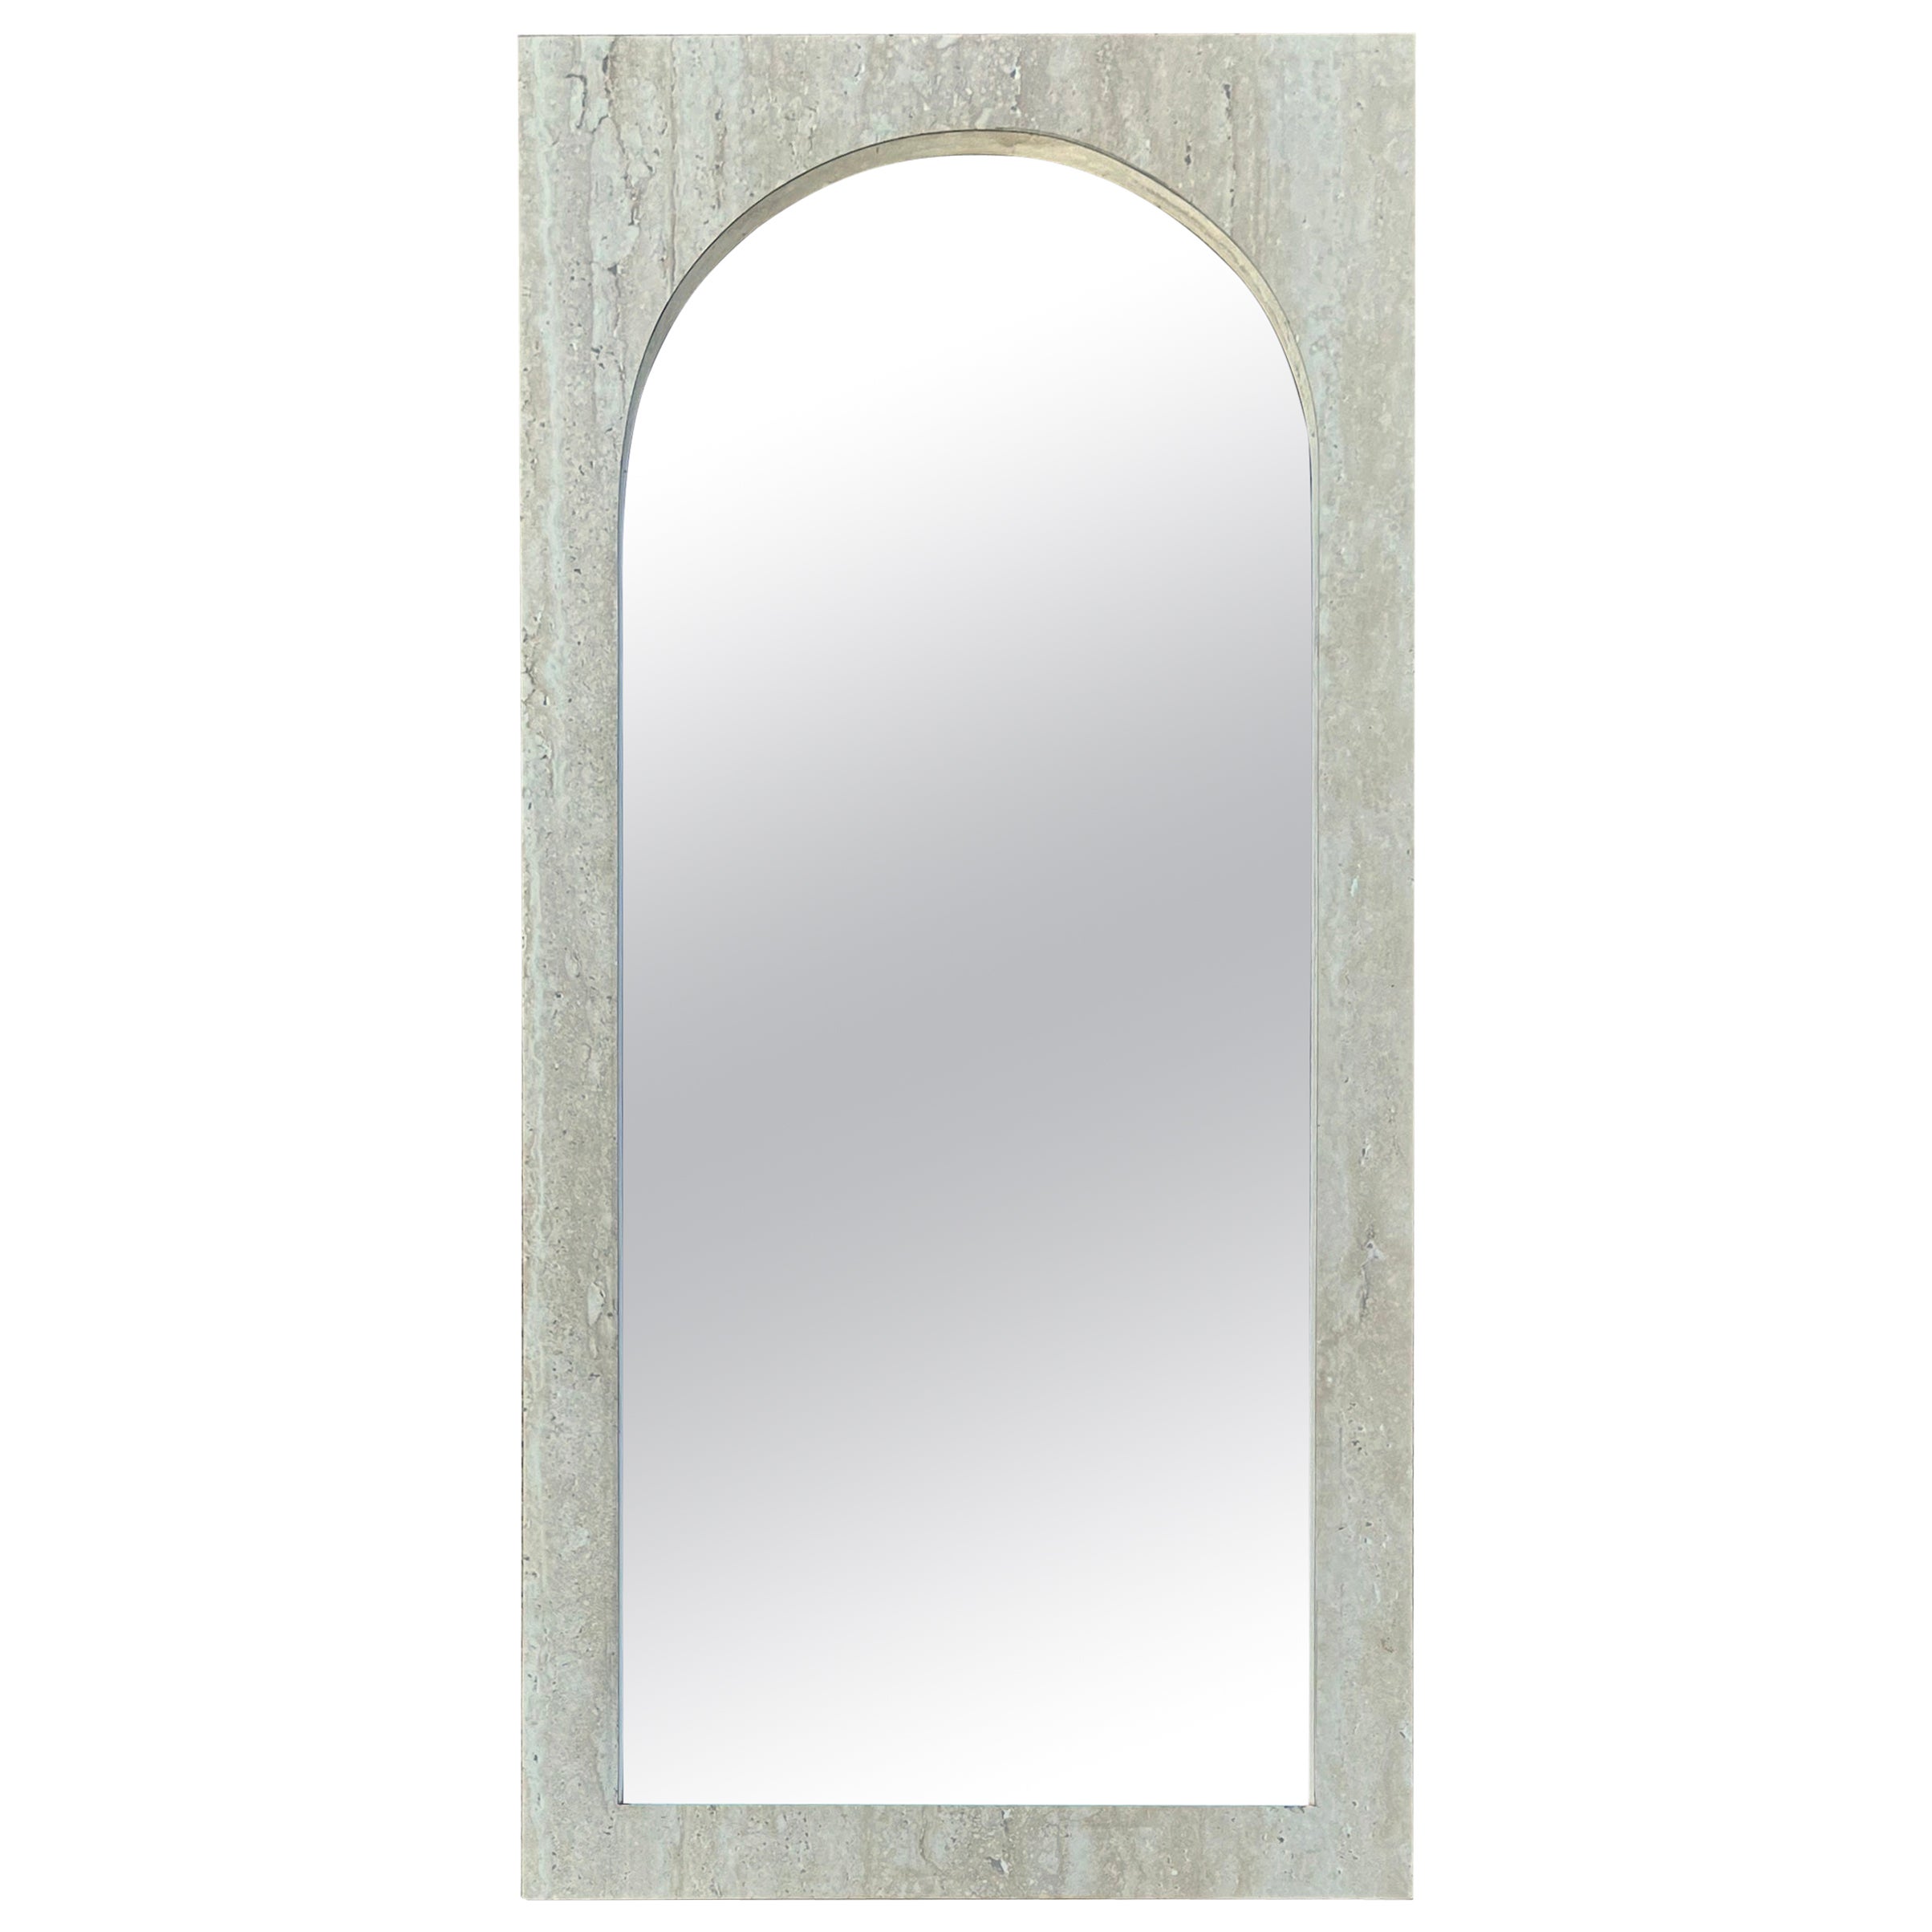 1980s Postmodern Marbleized Formica Wall Mirror For Sale